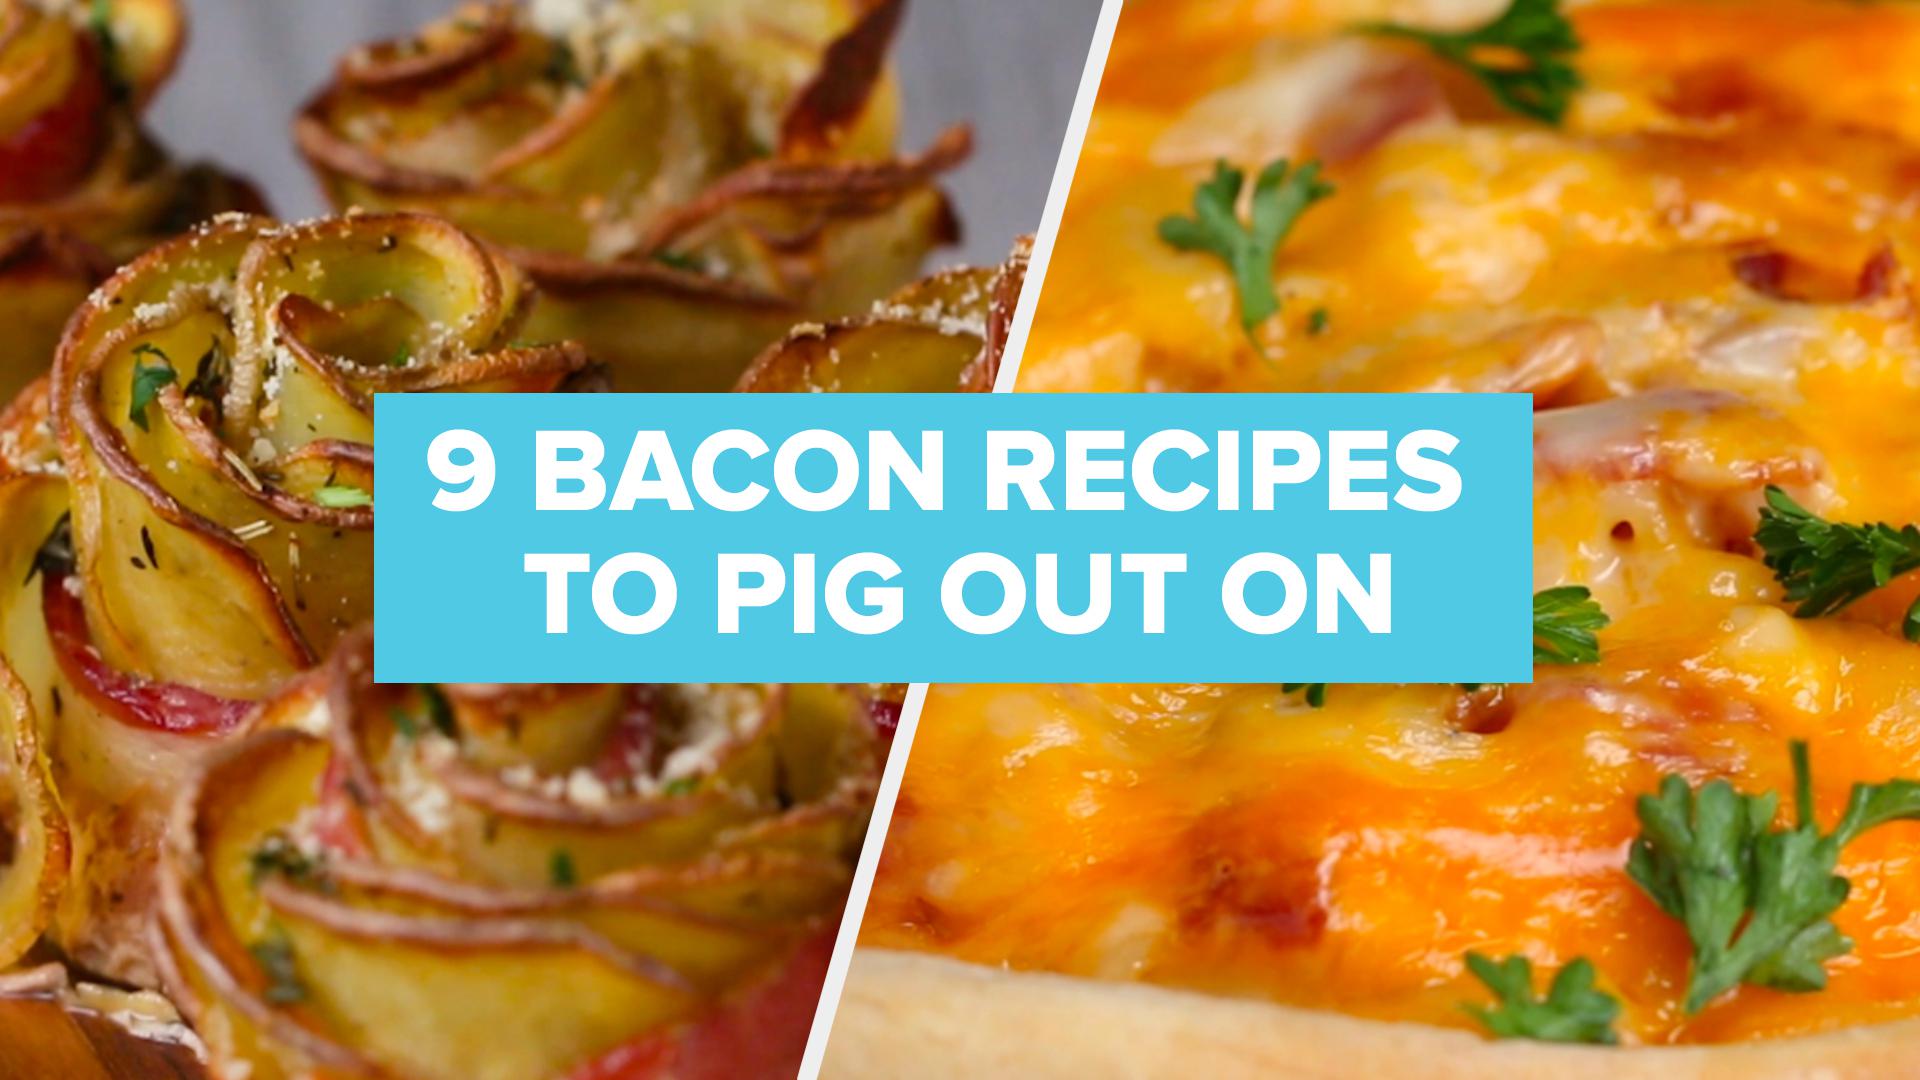 9 Bacon Recipes To Pig Out On